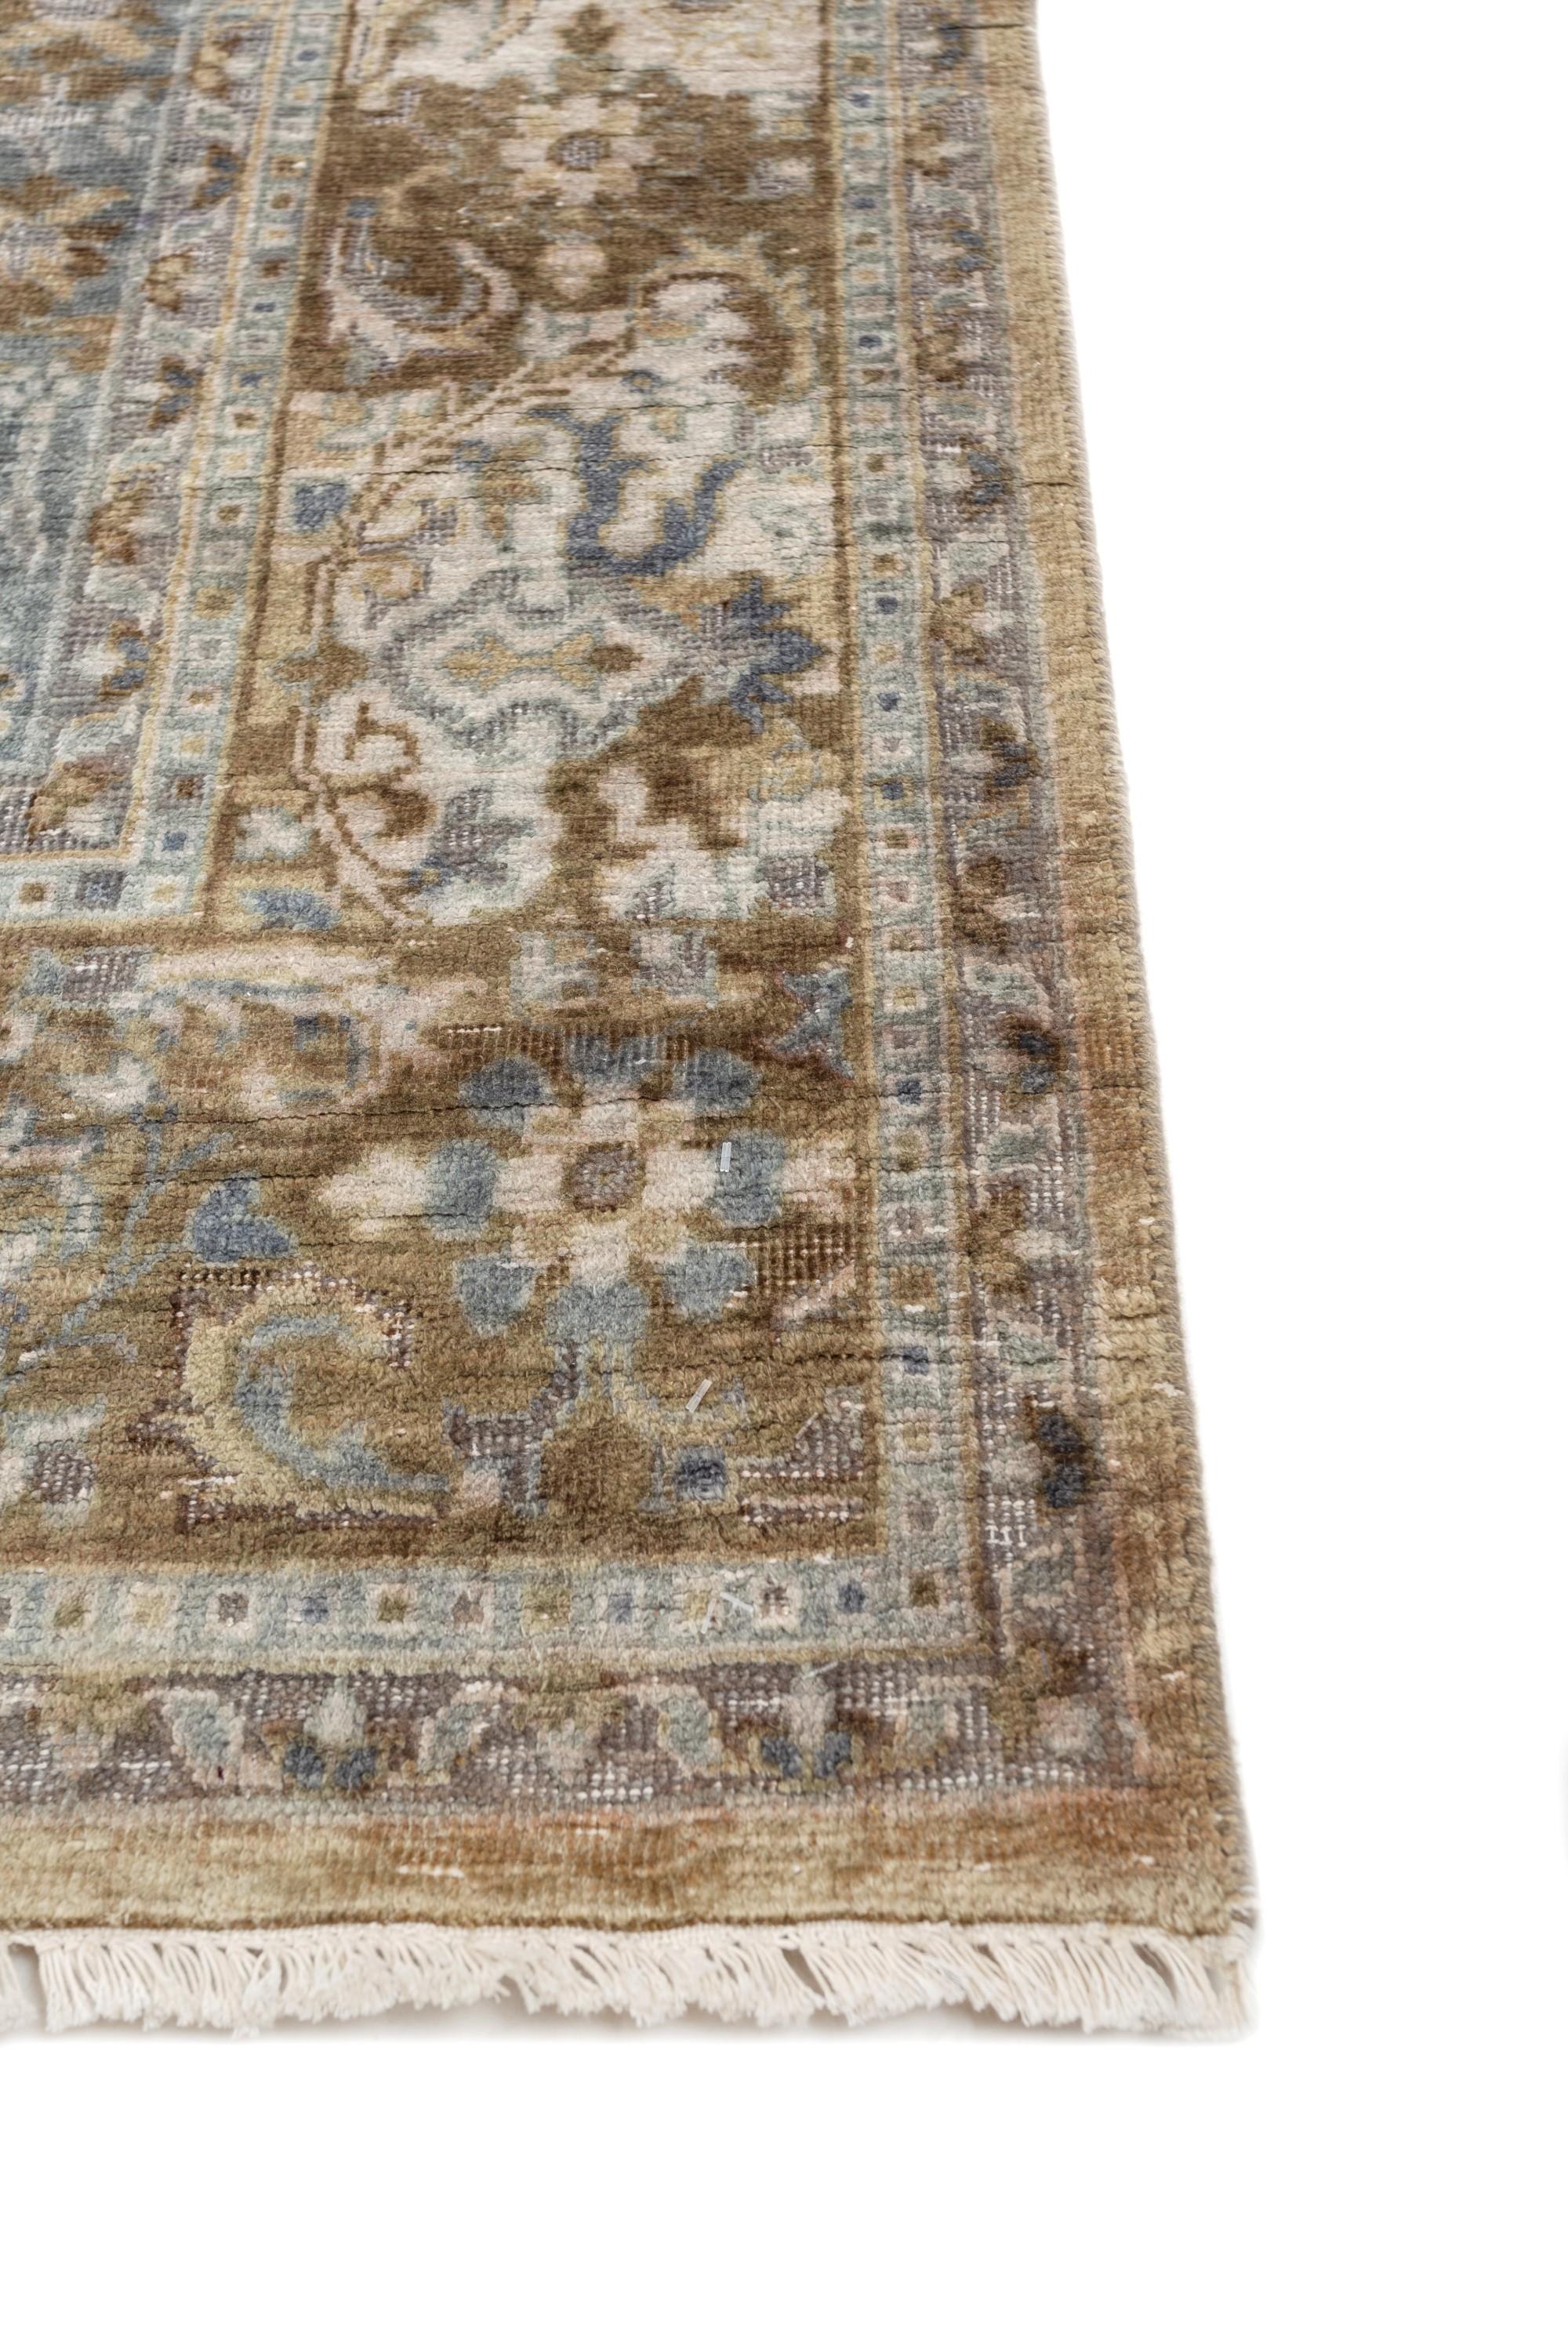 Immerse your space in the grandeur of this transitional hand-knotted rug that transcends time and decor styles. Handmade in rural India, this masterpiece features traditional patterns, invoking an aura of spectacular opulence and majestic shades.